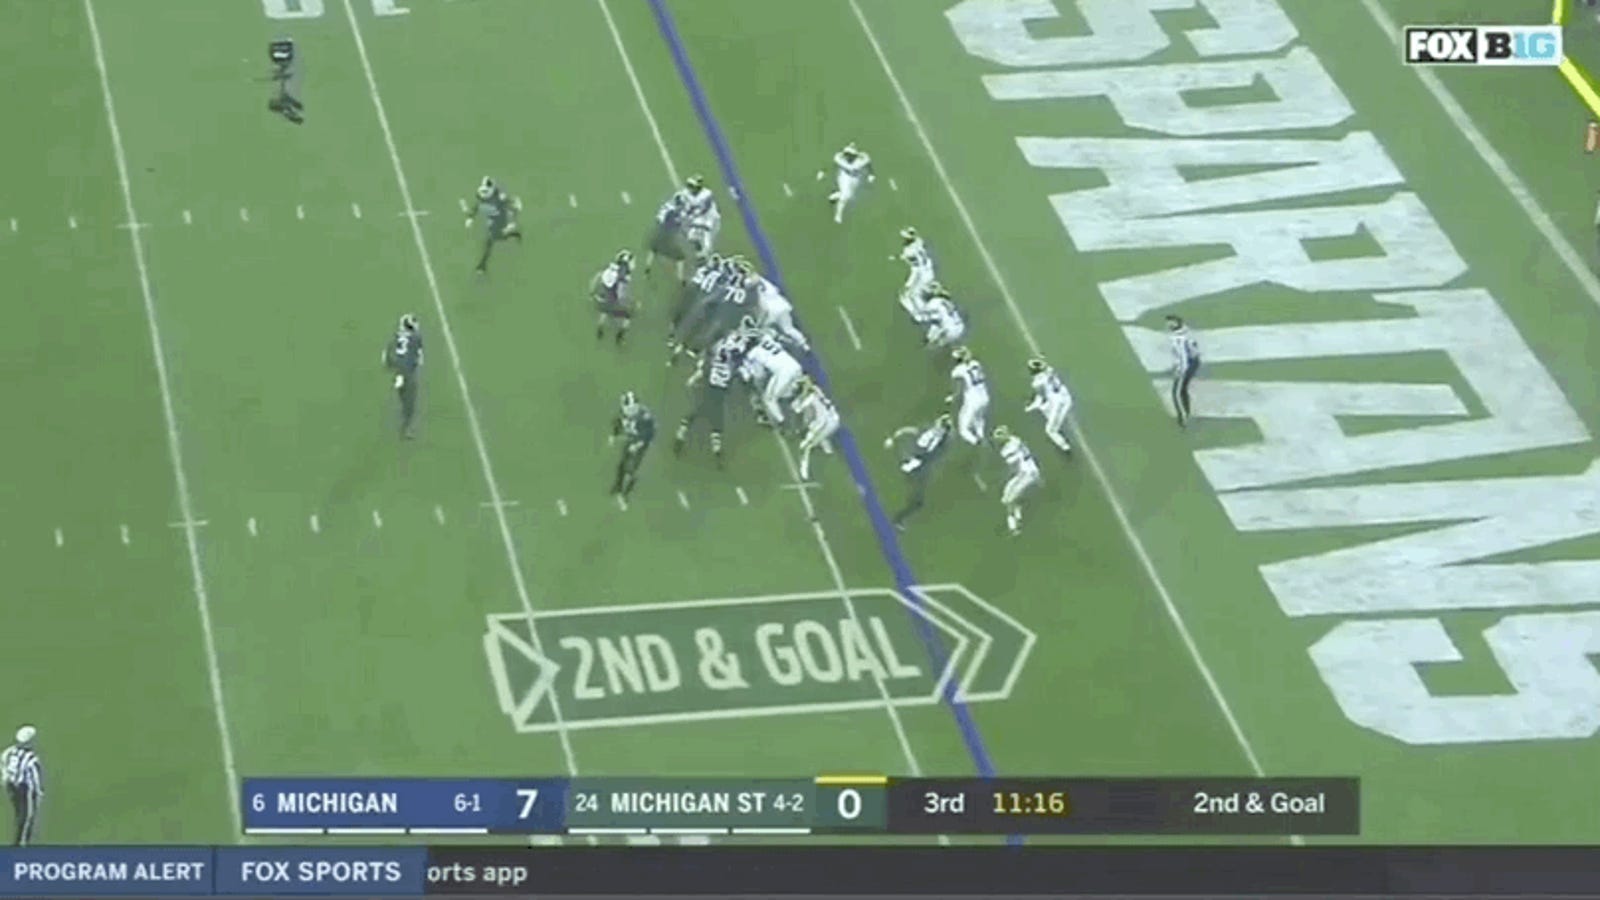 Michigan State's First Score Comes From 1600 x 900